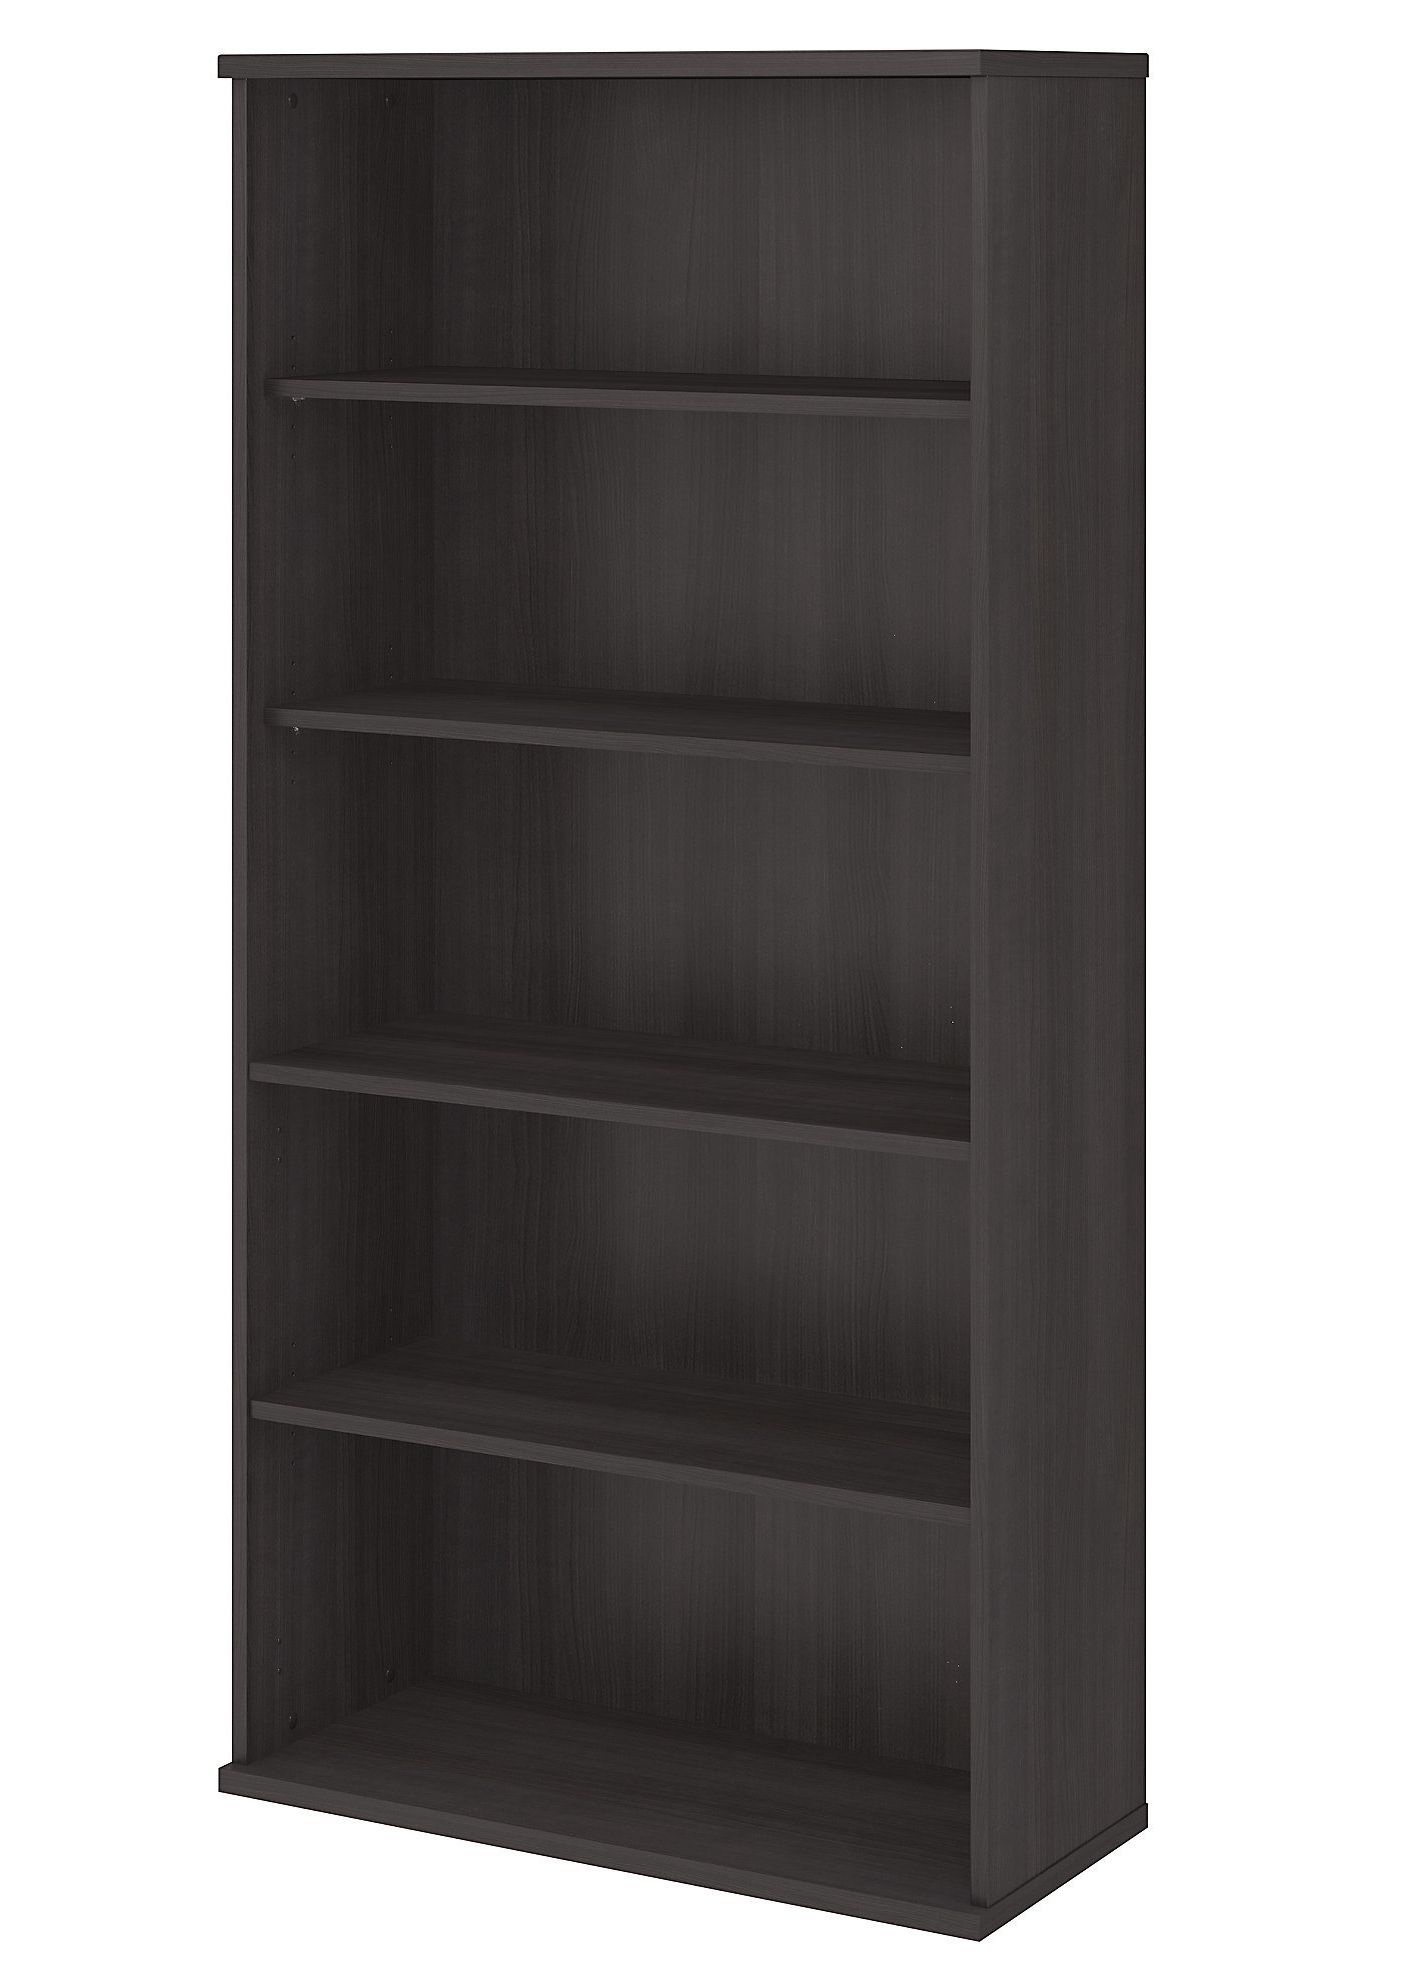 Trendy Series C Standard Bookcases In Details About Bush Business Furniture Studio C 5 Shelf Standard Bookcase (View 7 of 20)